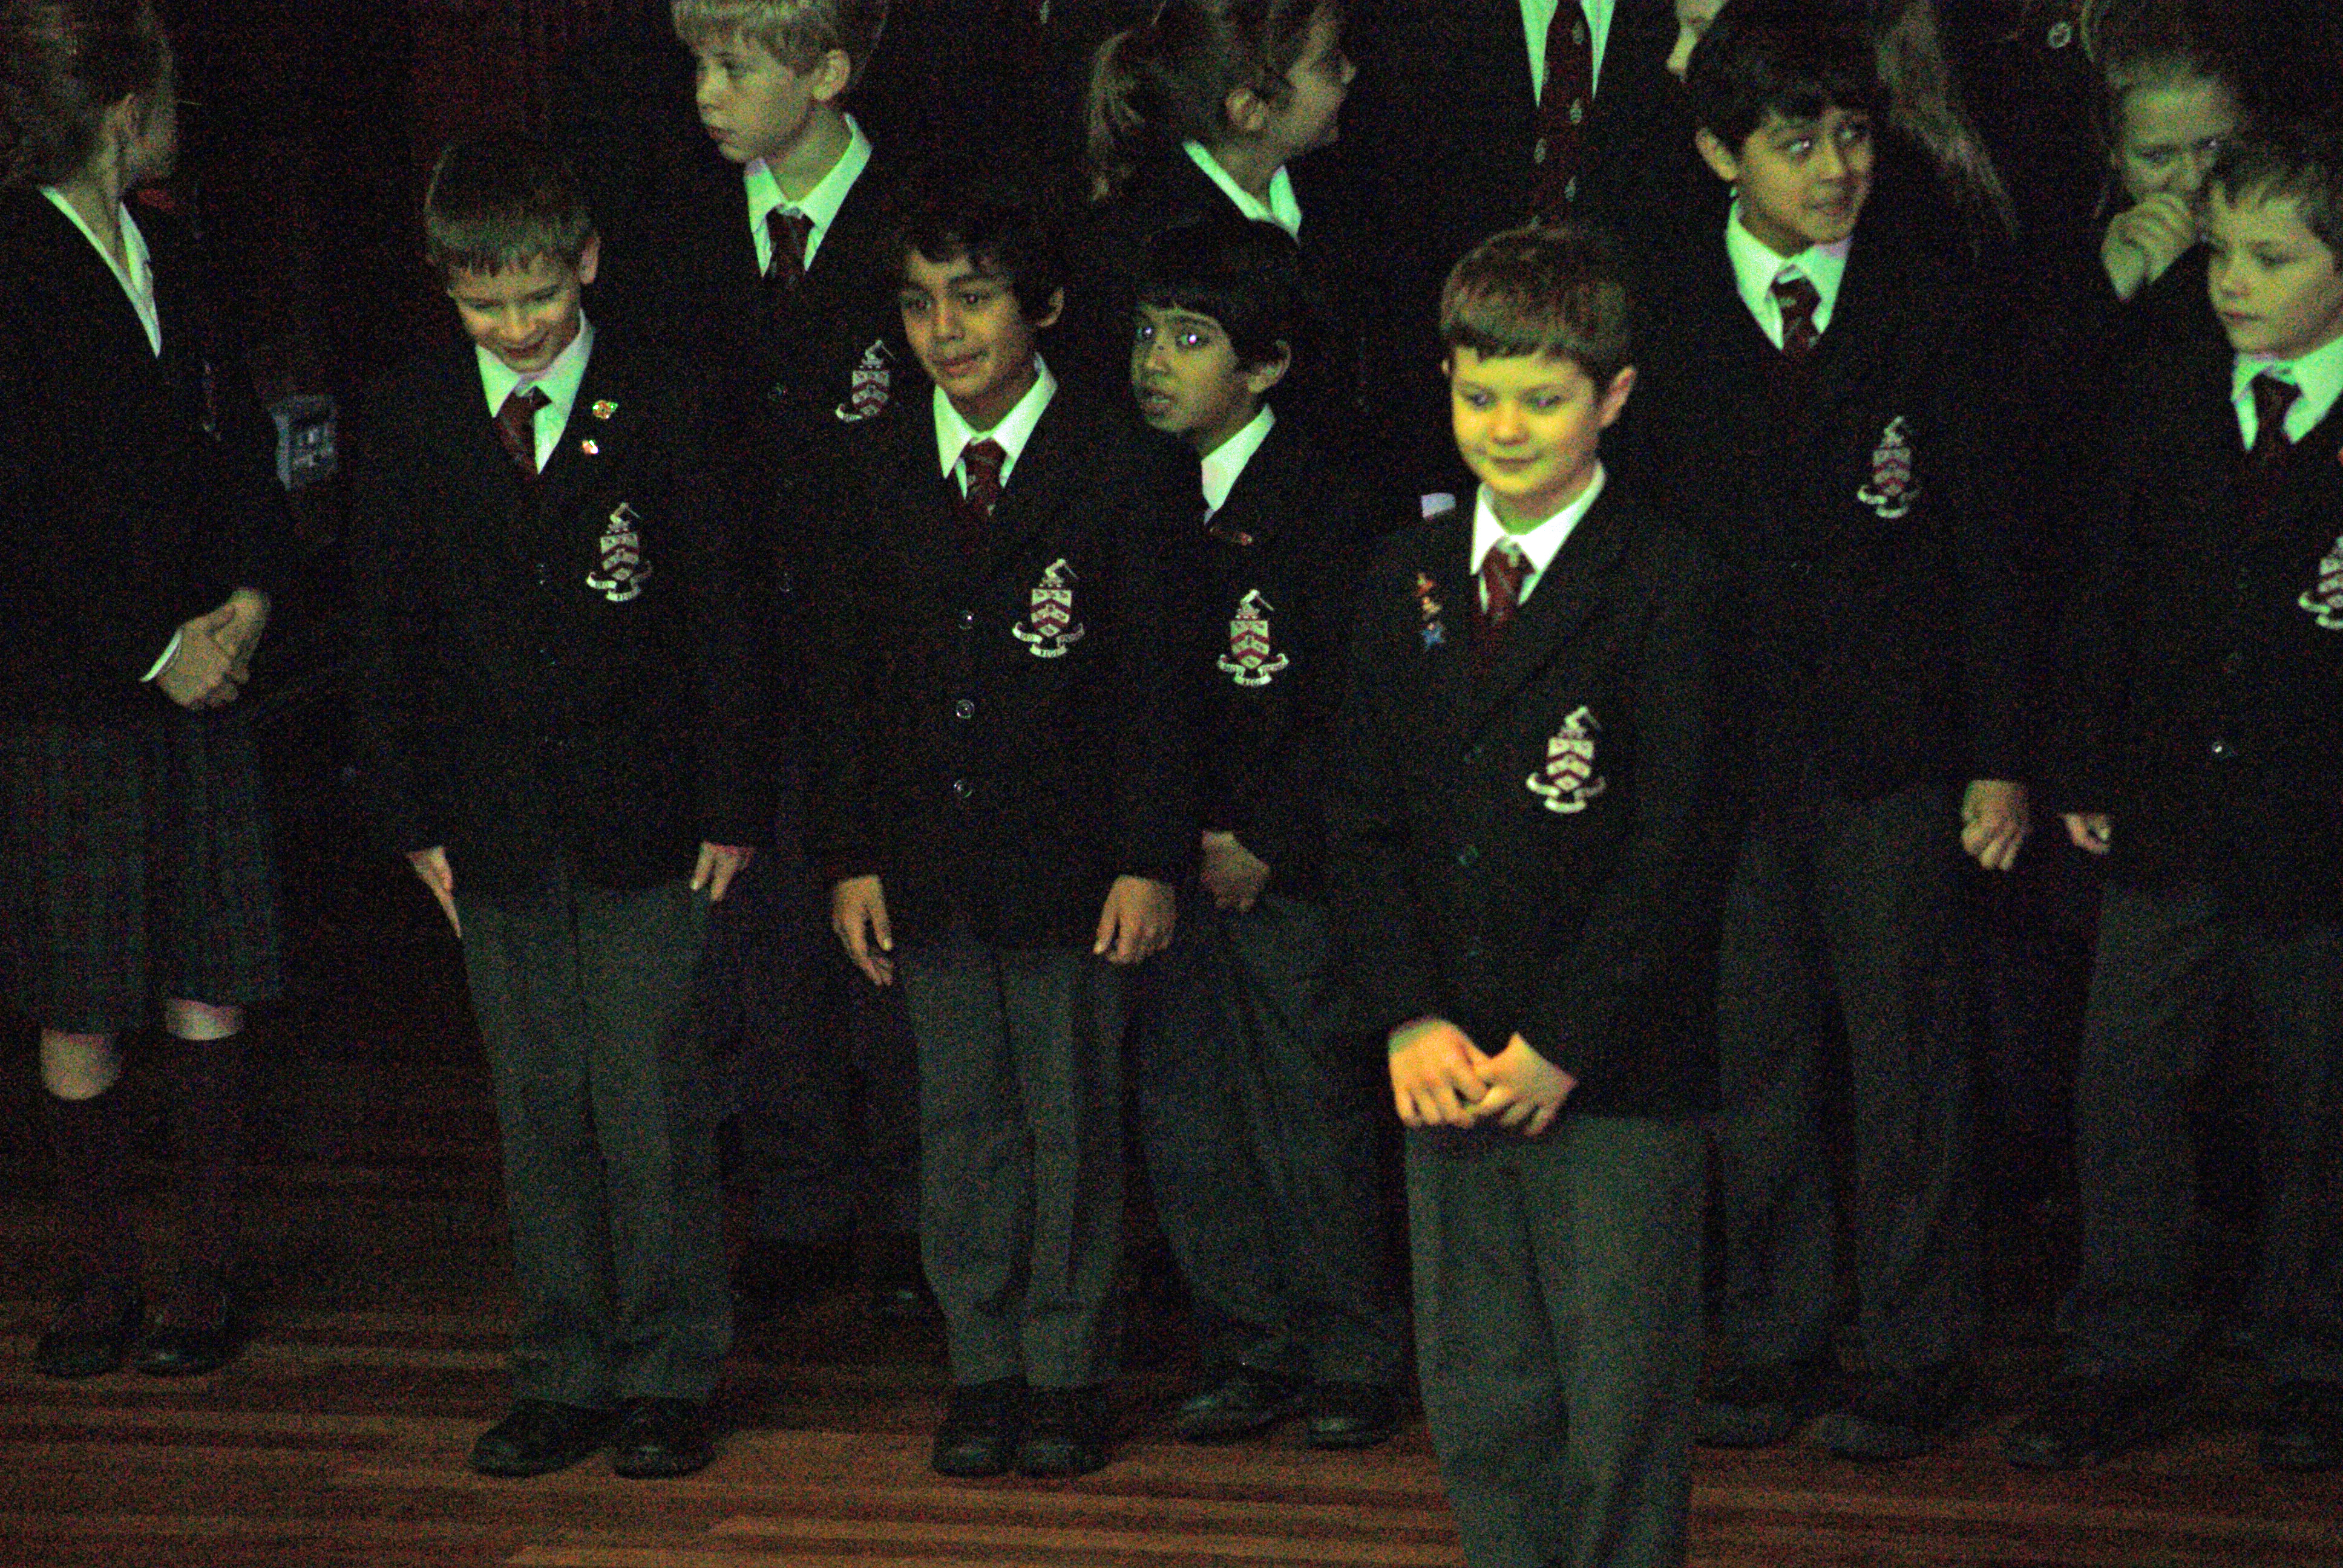 2014 Prep School House Singing Competition